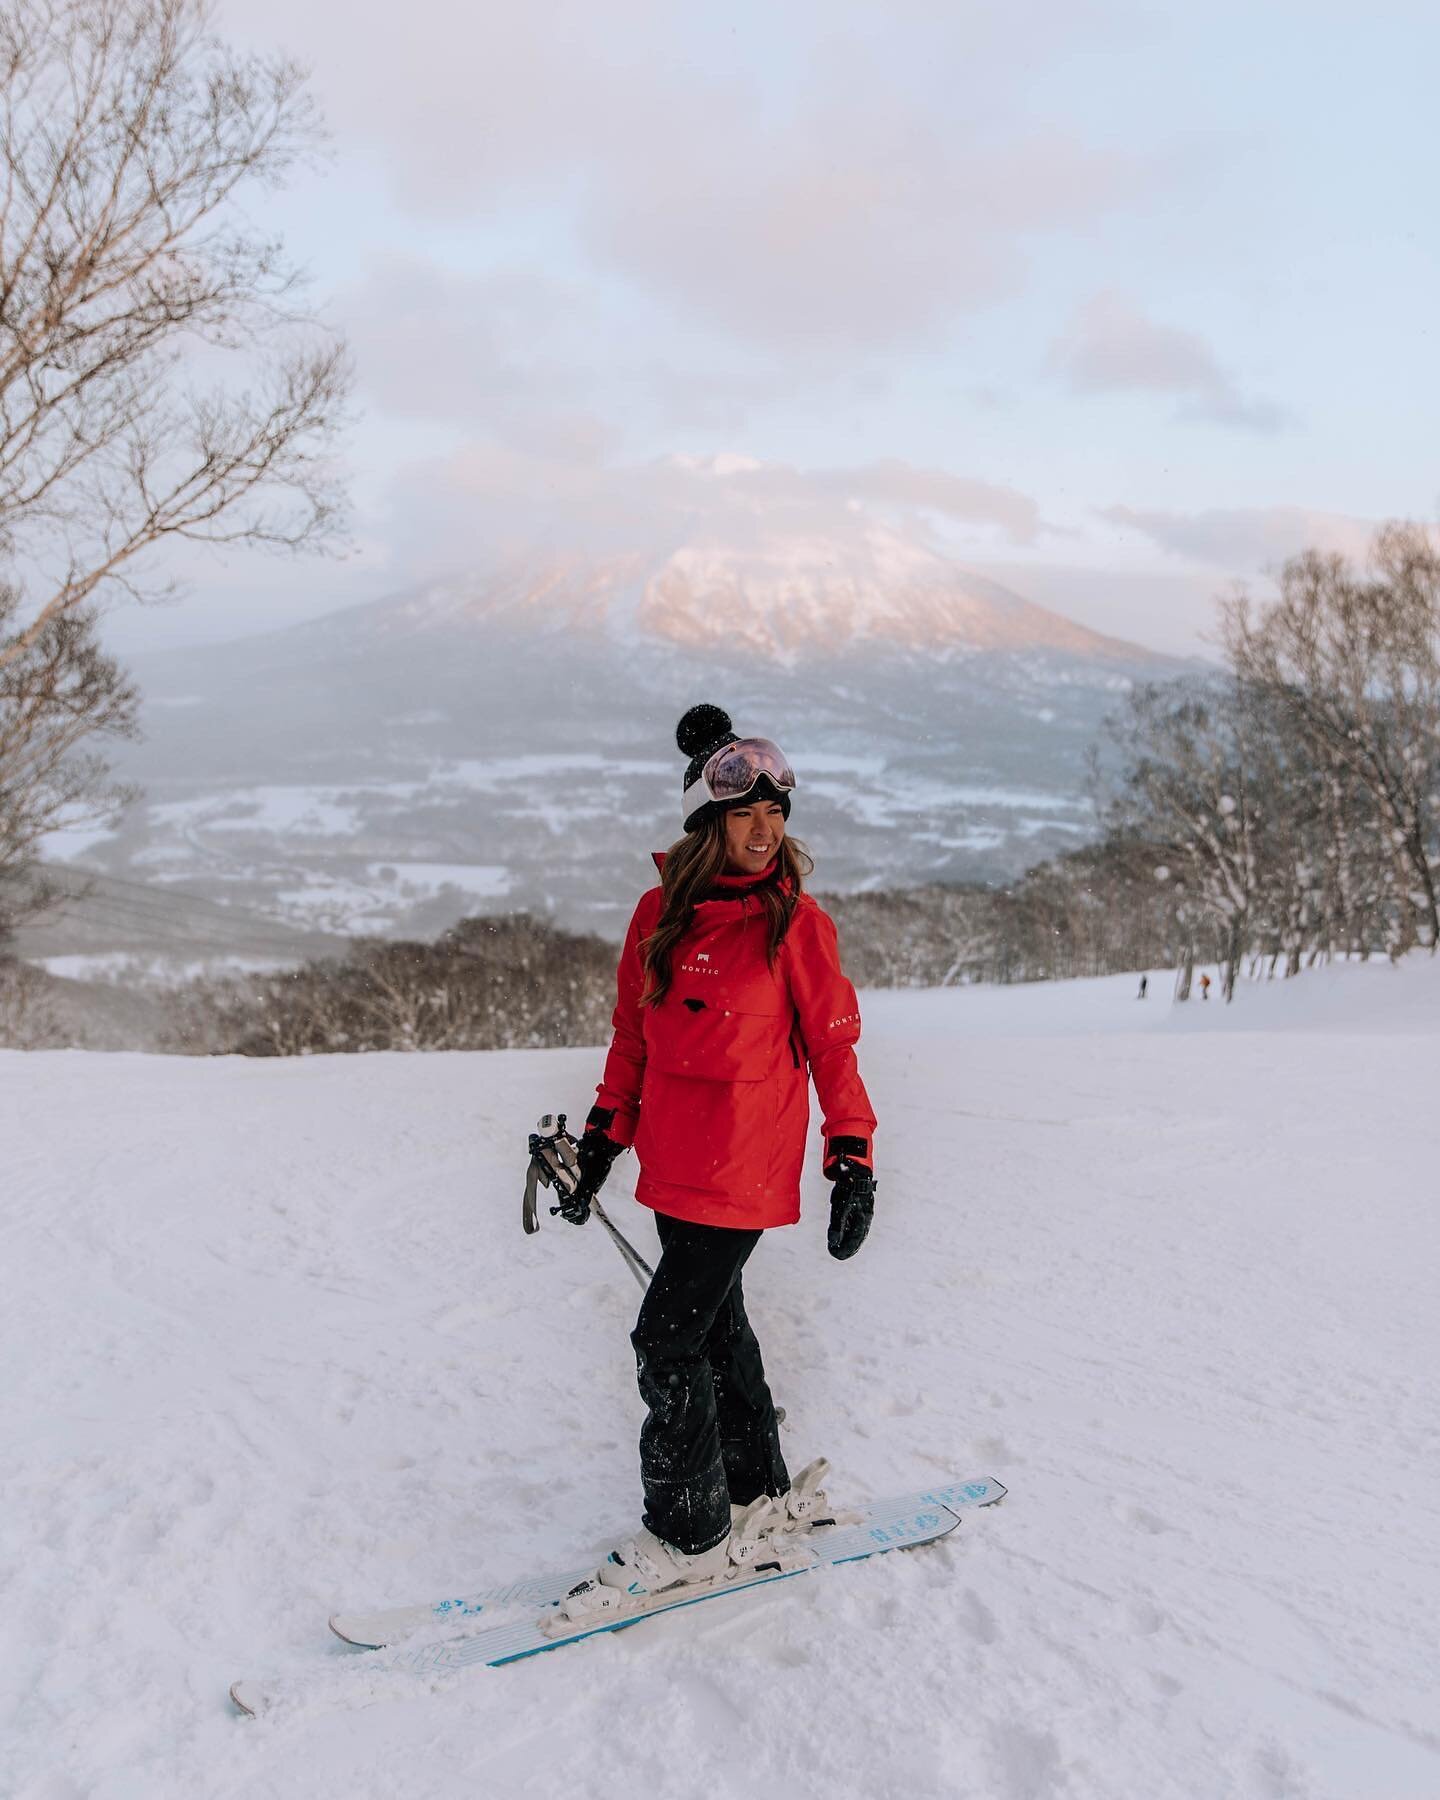 powder paradise

after three years of planning and postponing, so happy to have crossed &ldquo;ski in japan&rdquo; off my bucket list!

If you&rsquo;re planning a similar trip, here&rsquo;s some things to keep in mind!

❄️ Consider purchasing an @iko